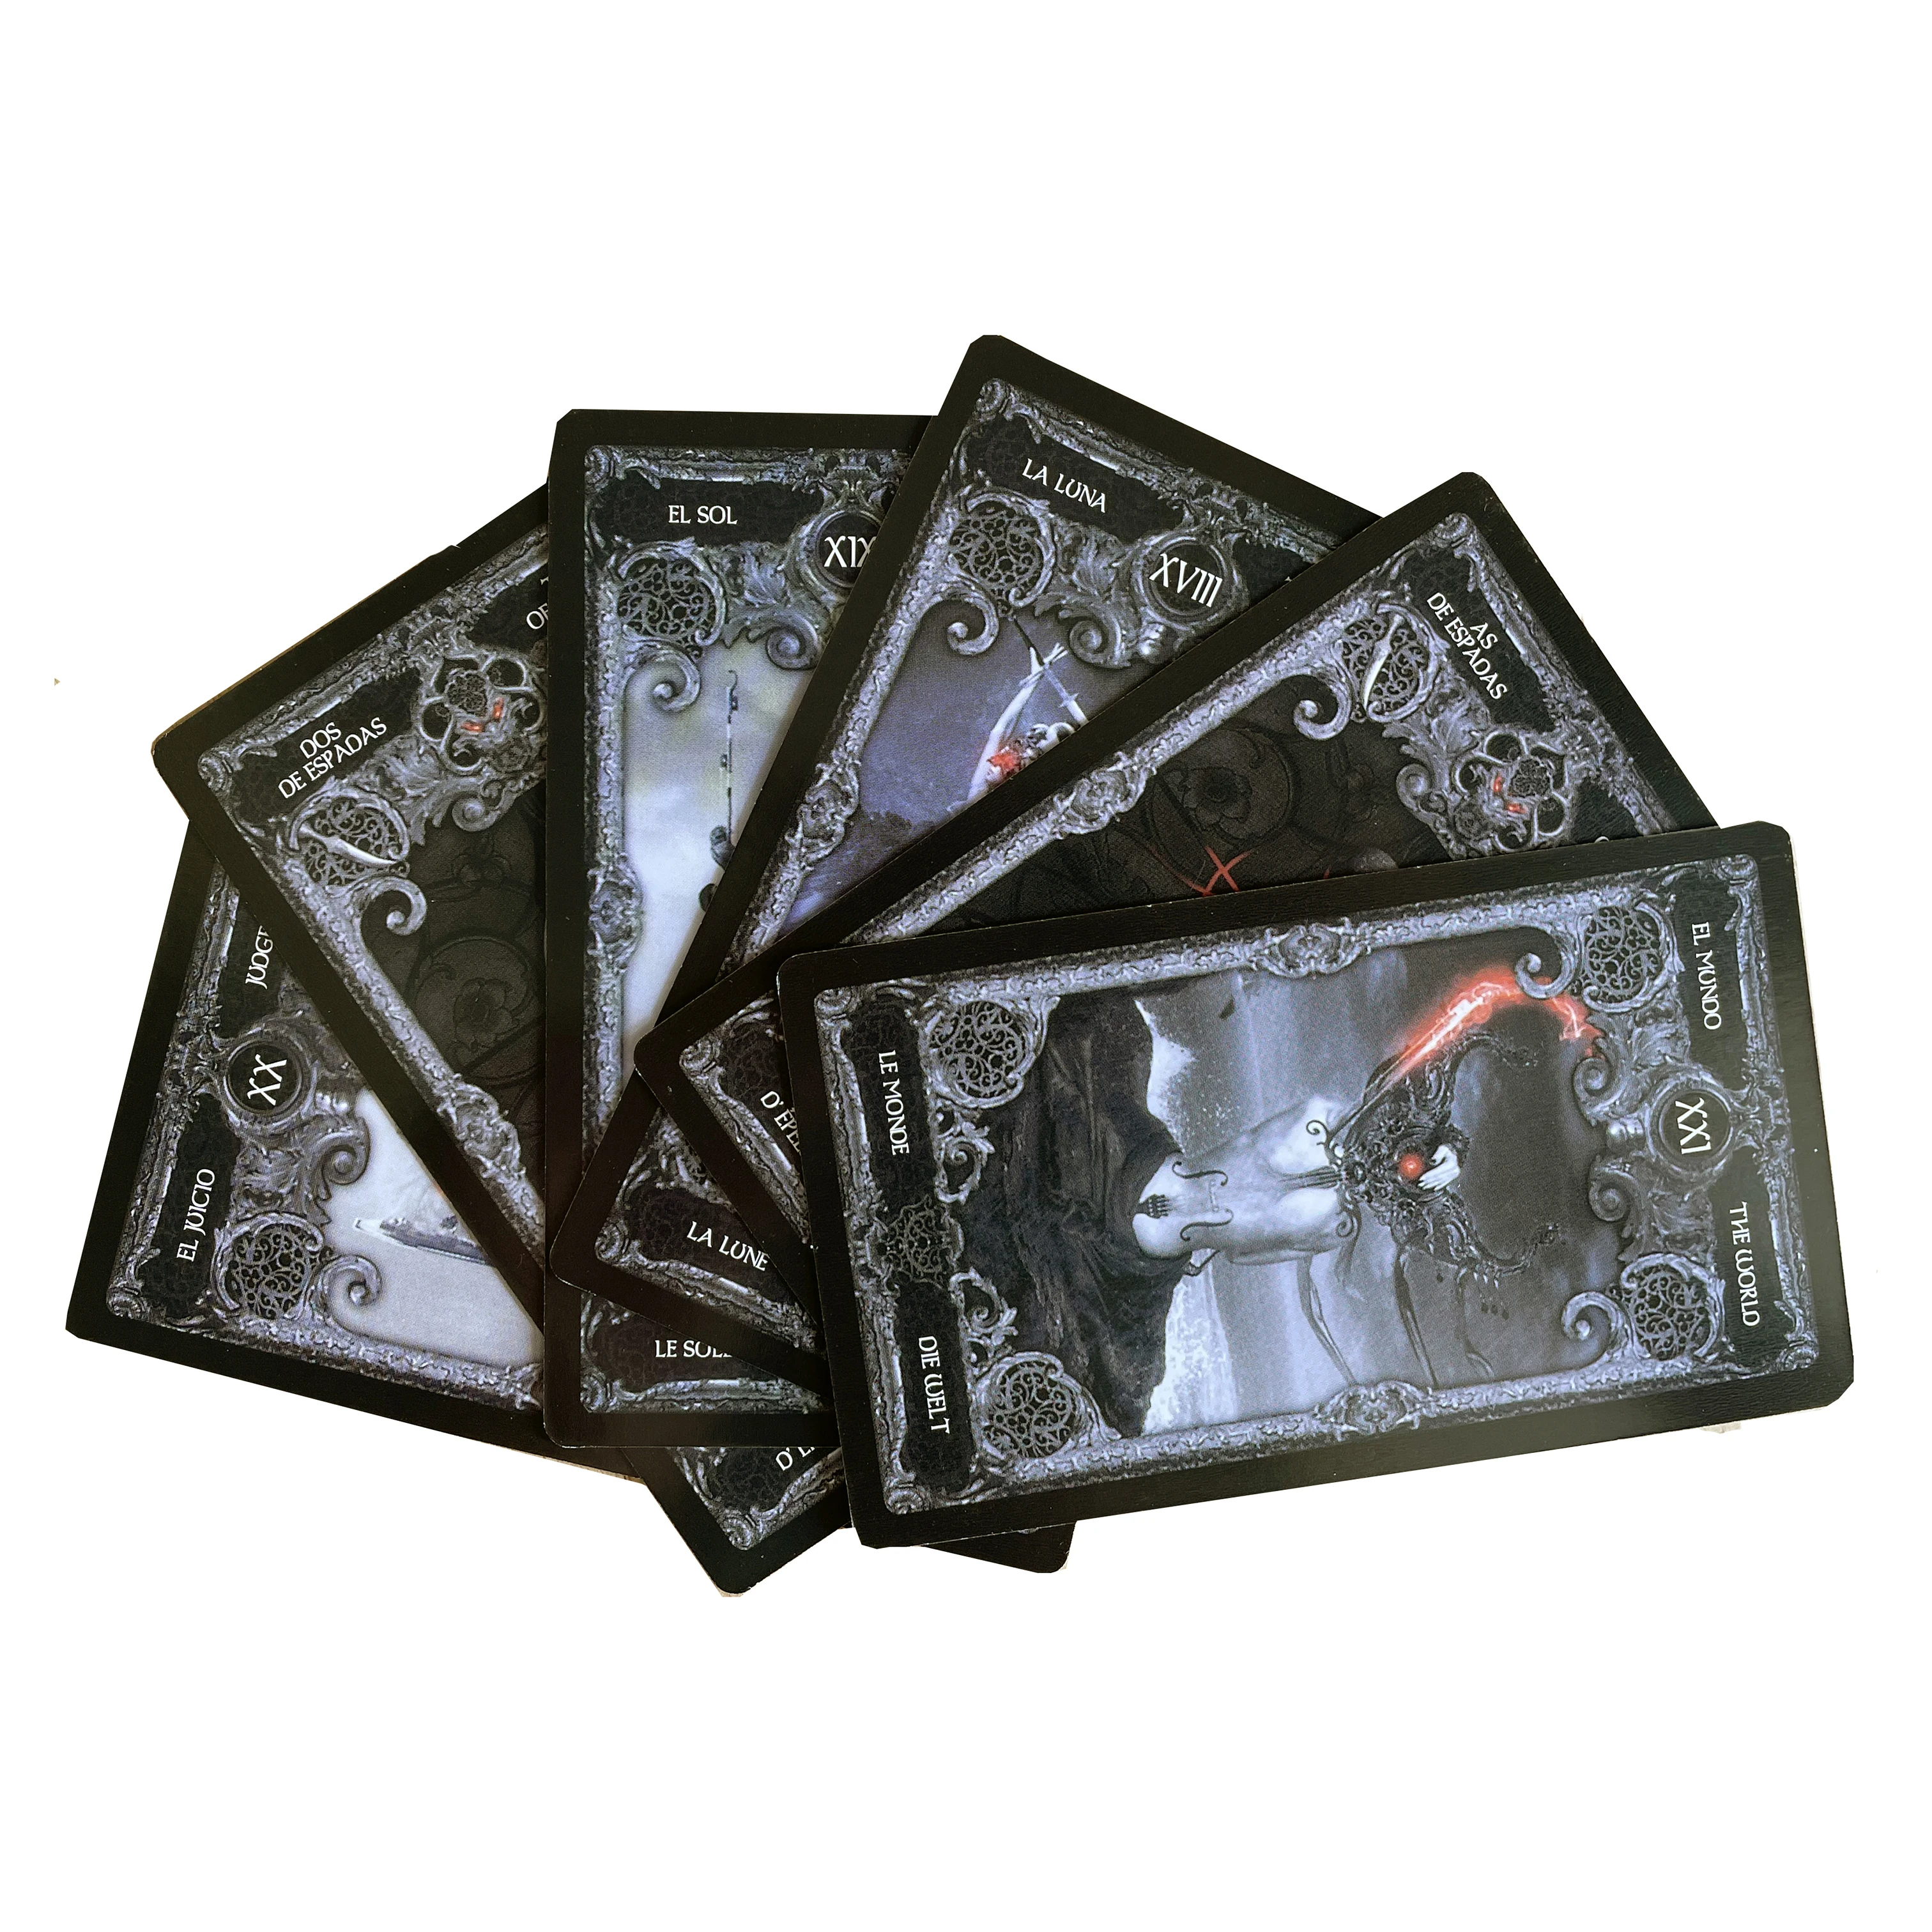 Dark tarot card deck for beginners , Unique tarot cards deck with guidebook , Full tarot decks 78 cards ,Beautiful oracle cards the harmony tarot a deck for growth and healing 78 cards guidebook